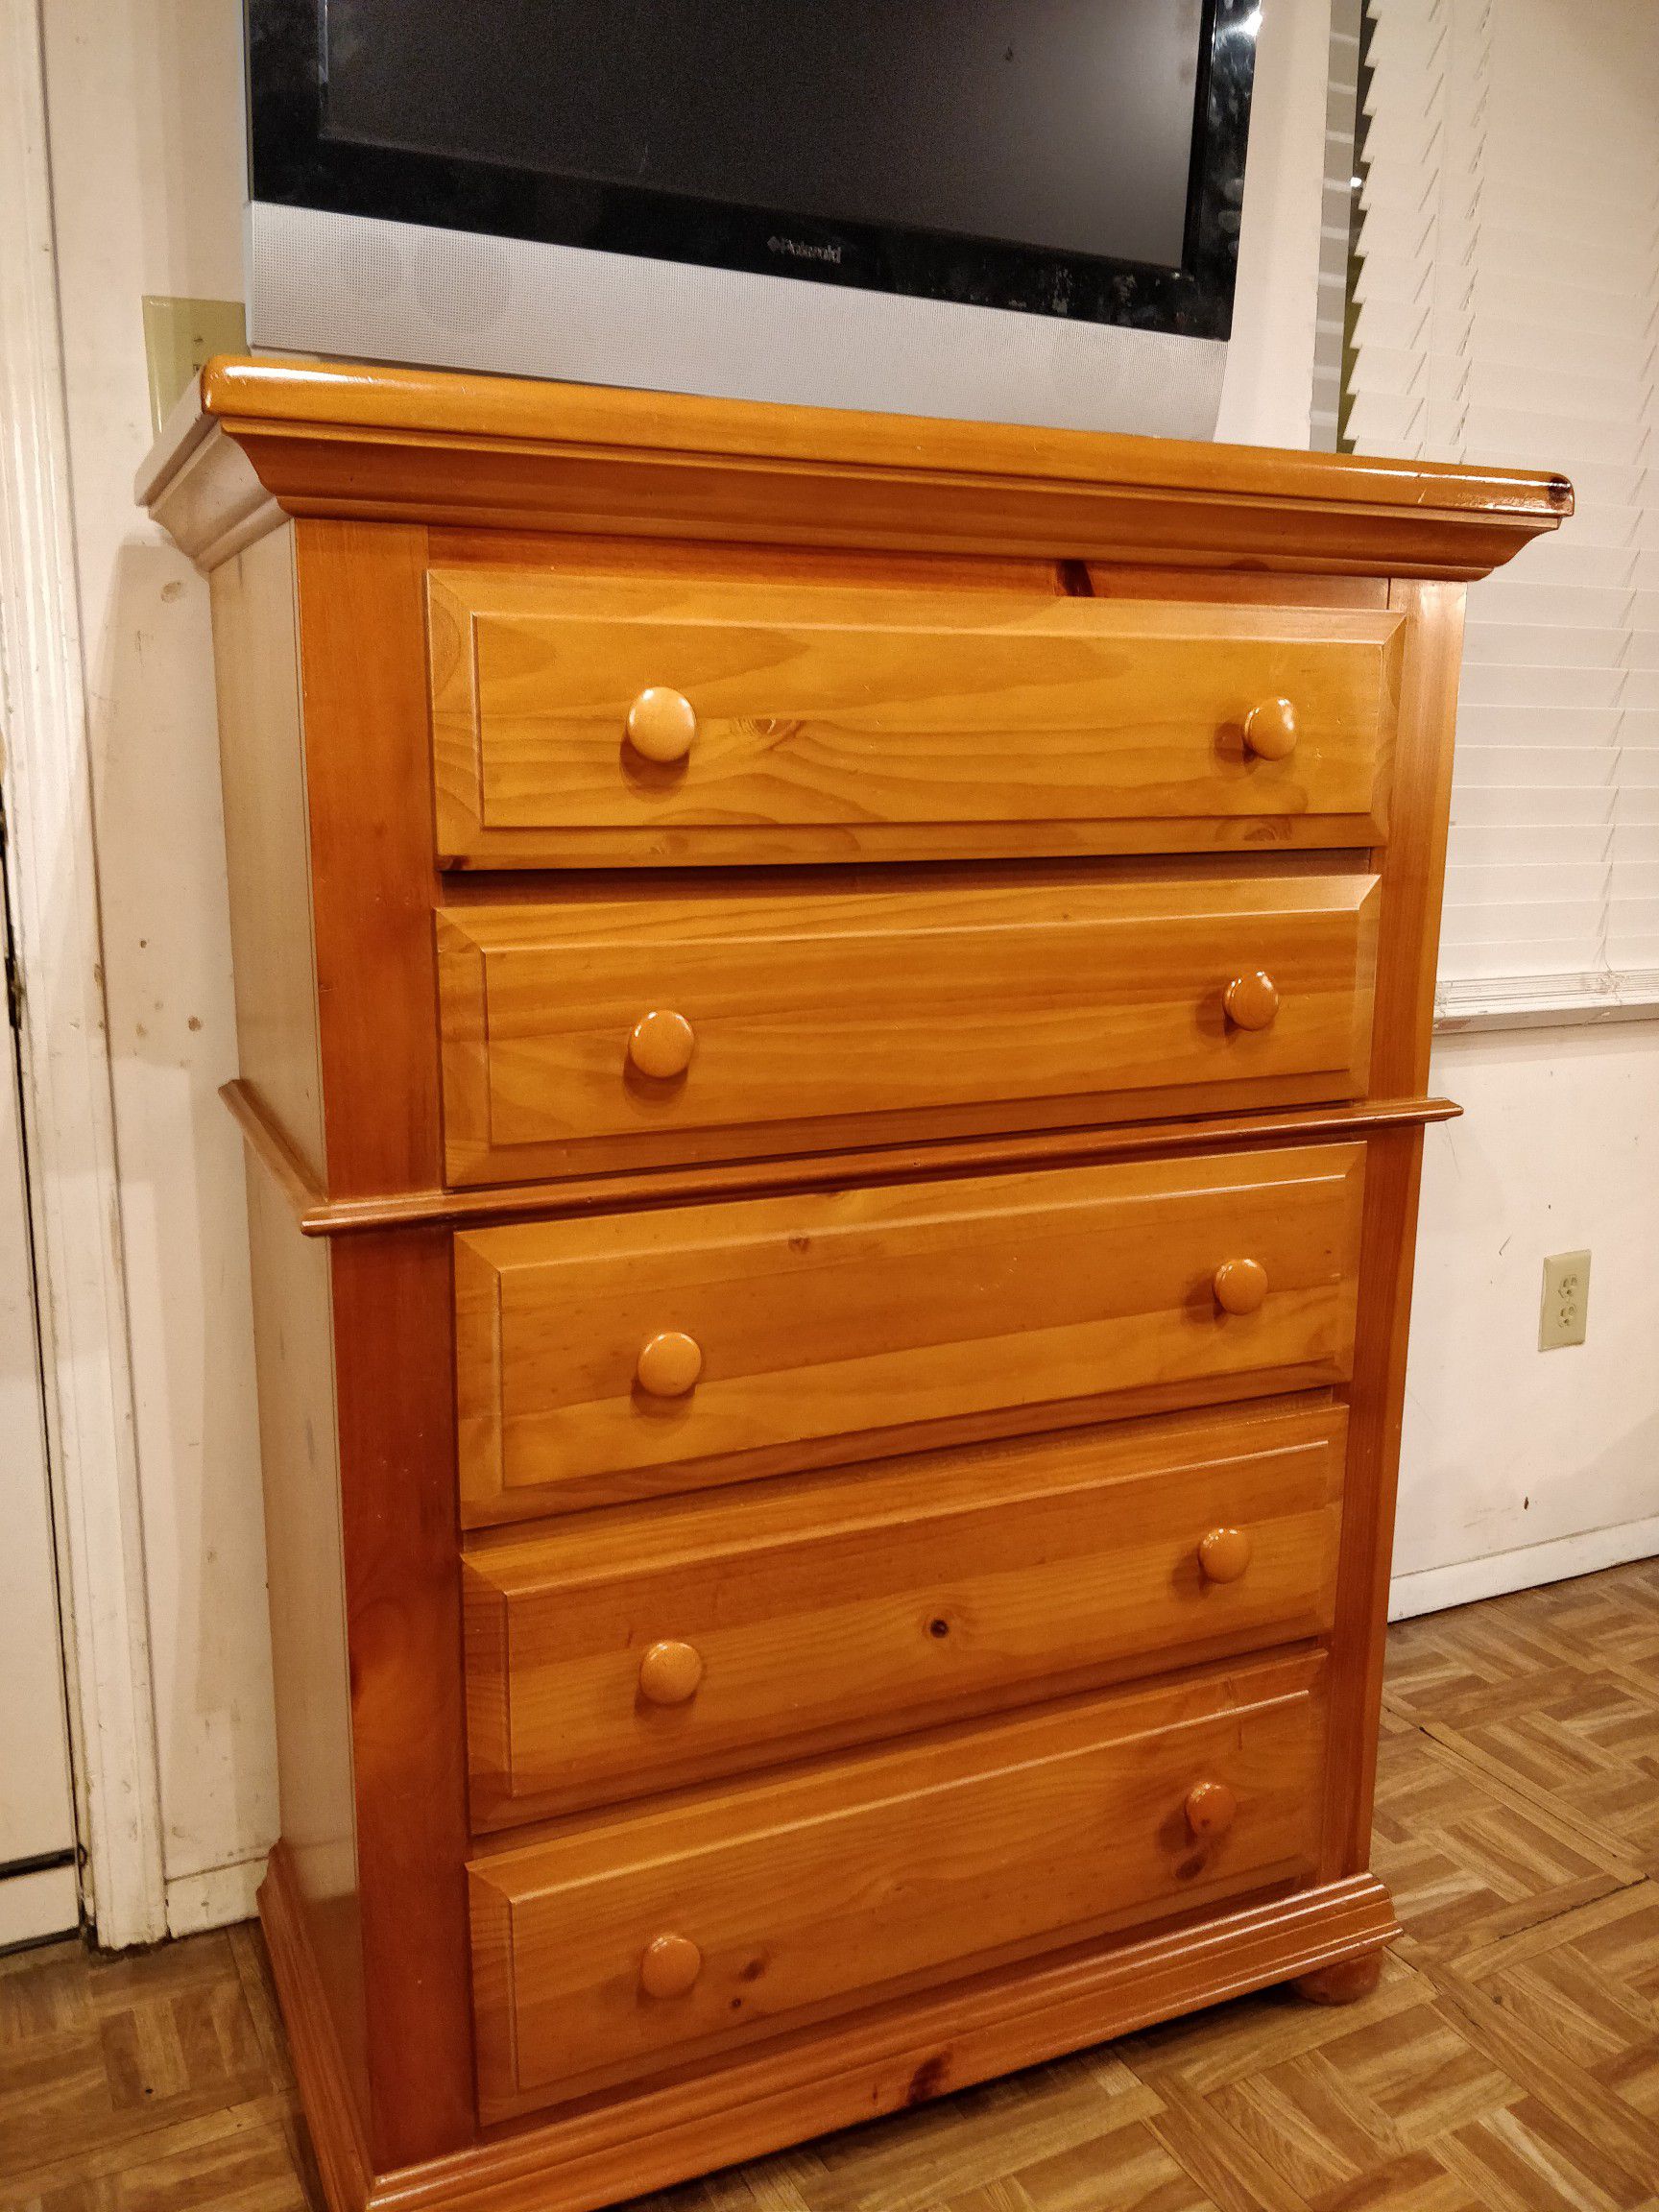 Solid wood big BASSETT chest dresser with big drawers in Very good condition, all drawers sliding smoothly, pet free smoke free. L38.4"*W19"*H50.5"